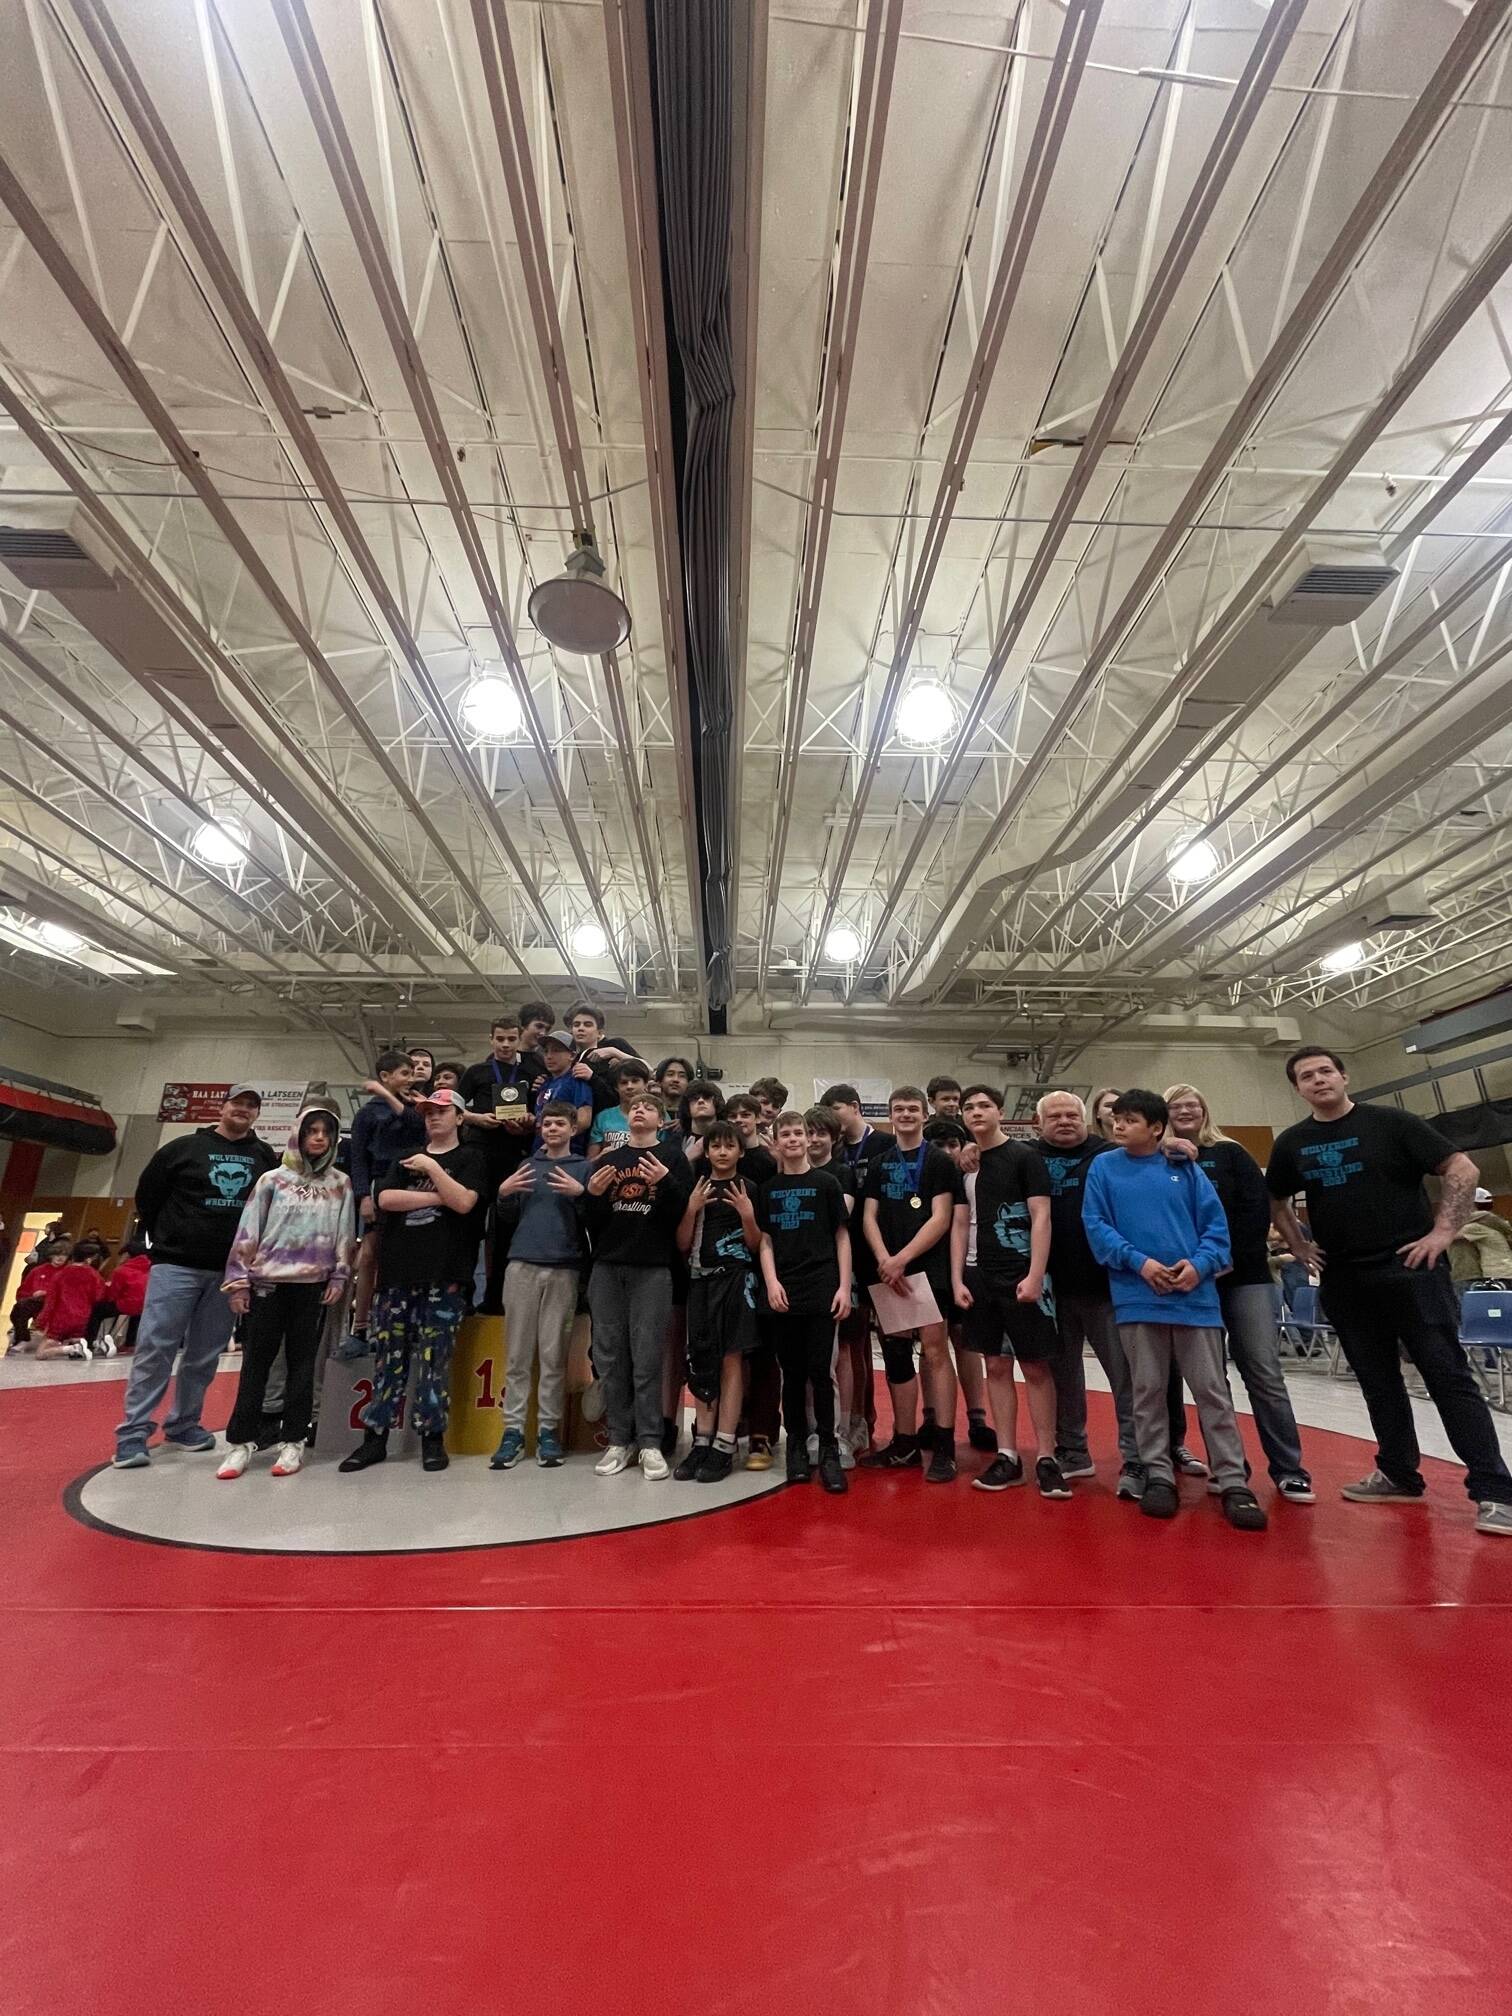 The boys team for Dzantik’i Heeni Wolverines pose for a group photo on Saturday after being crowned team champs at this year’s Southeast Alaska Middle School Regional Wrestling Tournament. (Courtesy Photo / Jason Hass)